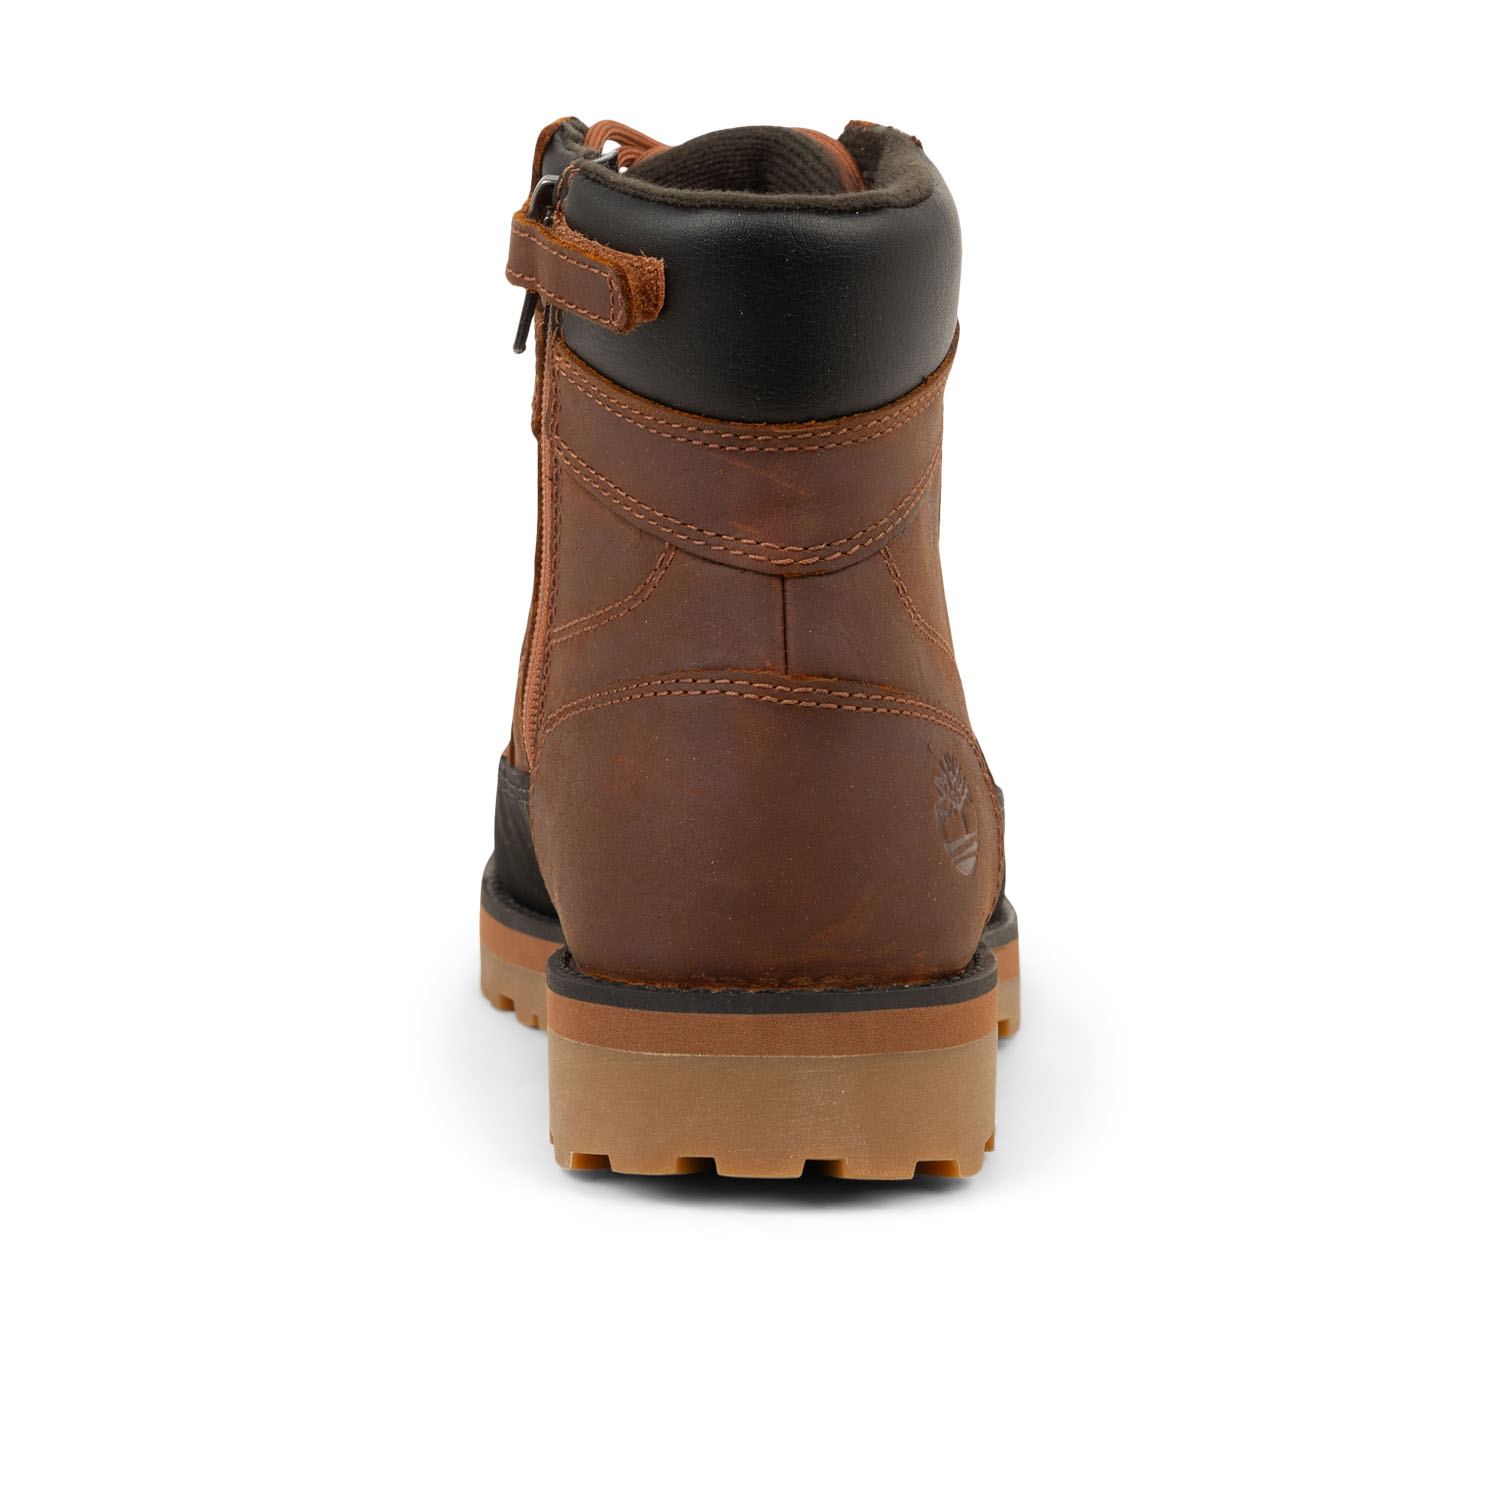 03 - COURMA KID - TIMBERLAND - Chaussures montantes - Cuir